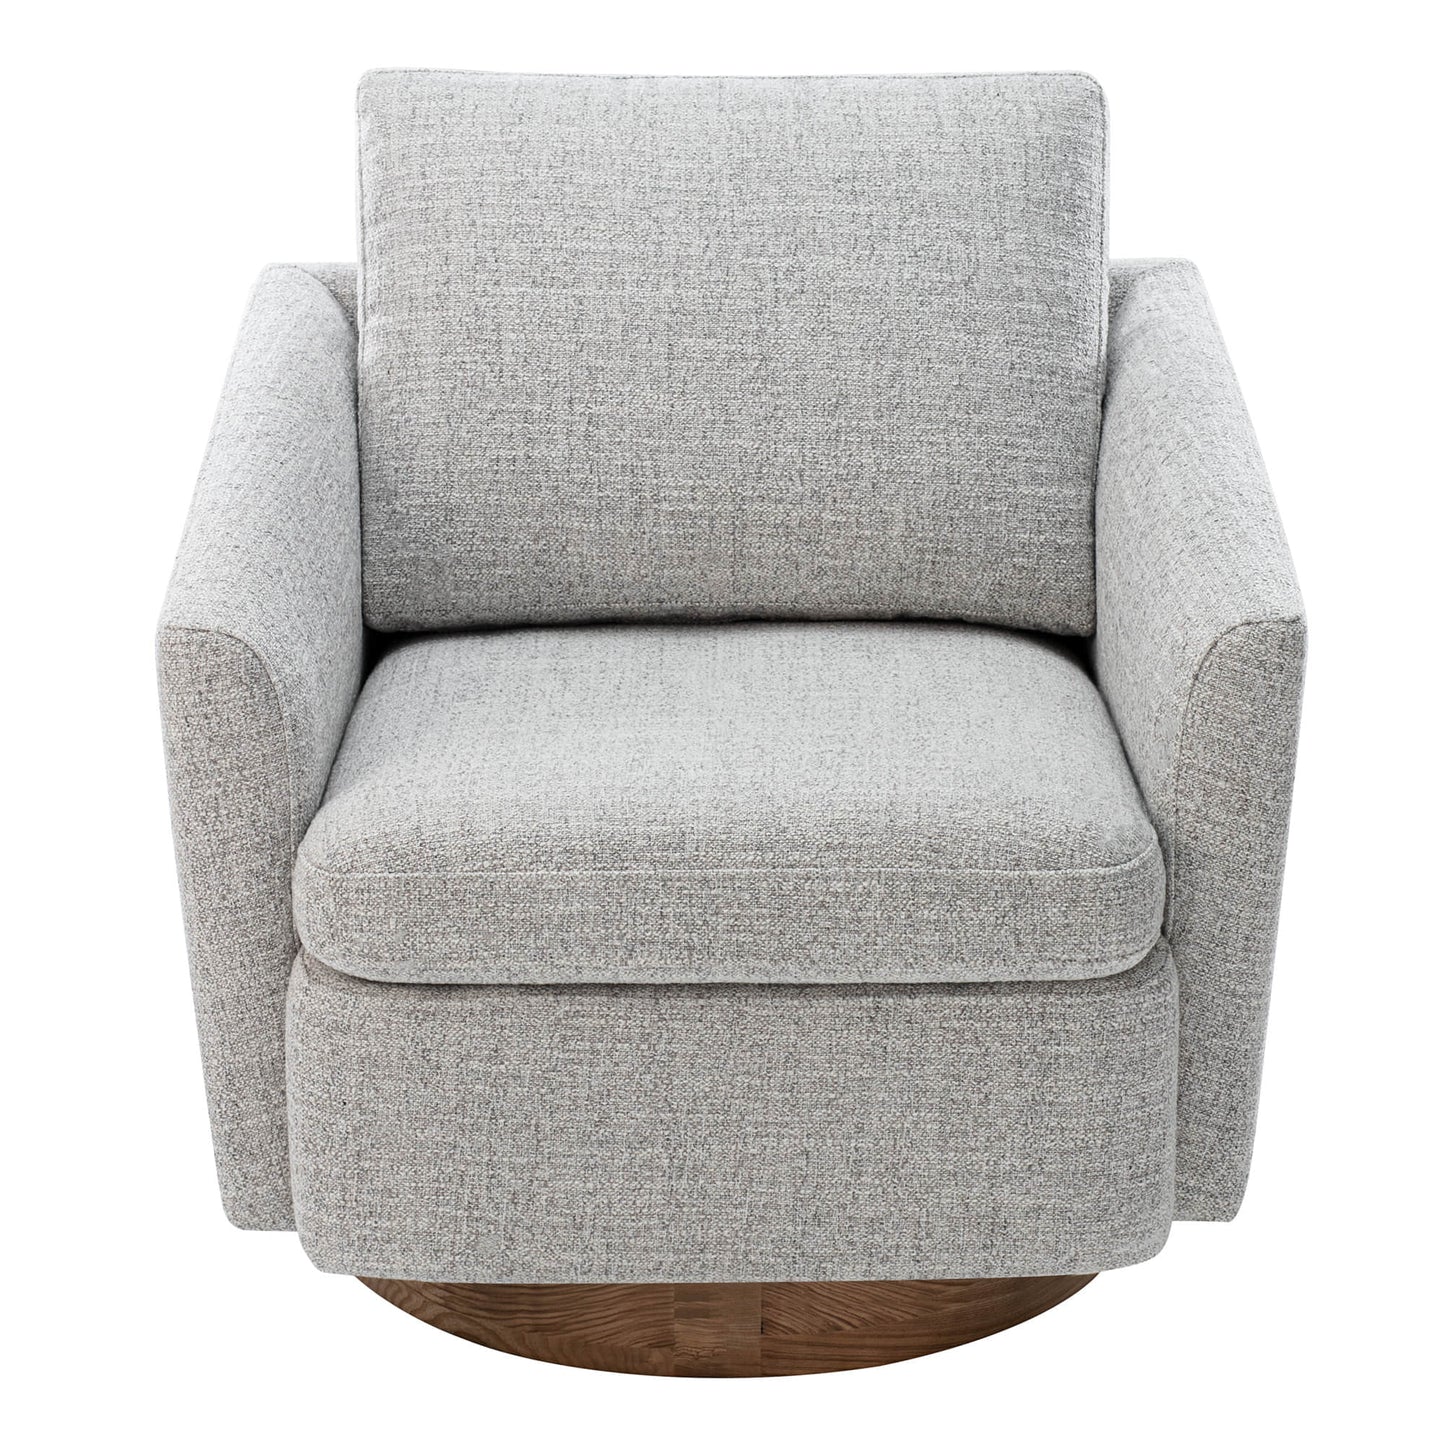 CHITA LIVING-Donella Modern Swivel Accent Chairs-Accent Chair-Fabric-White (Multi-Colored)-